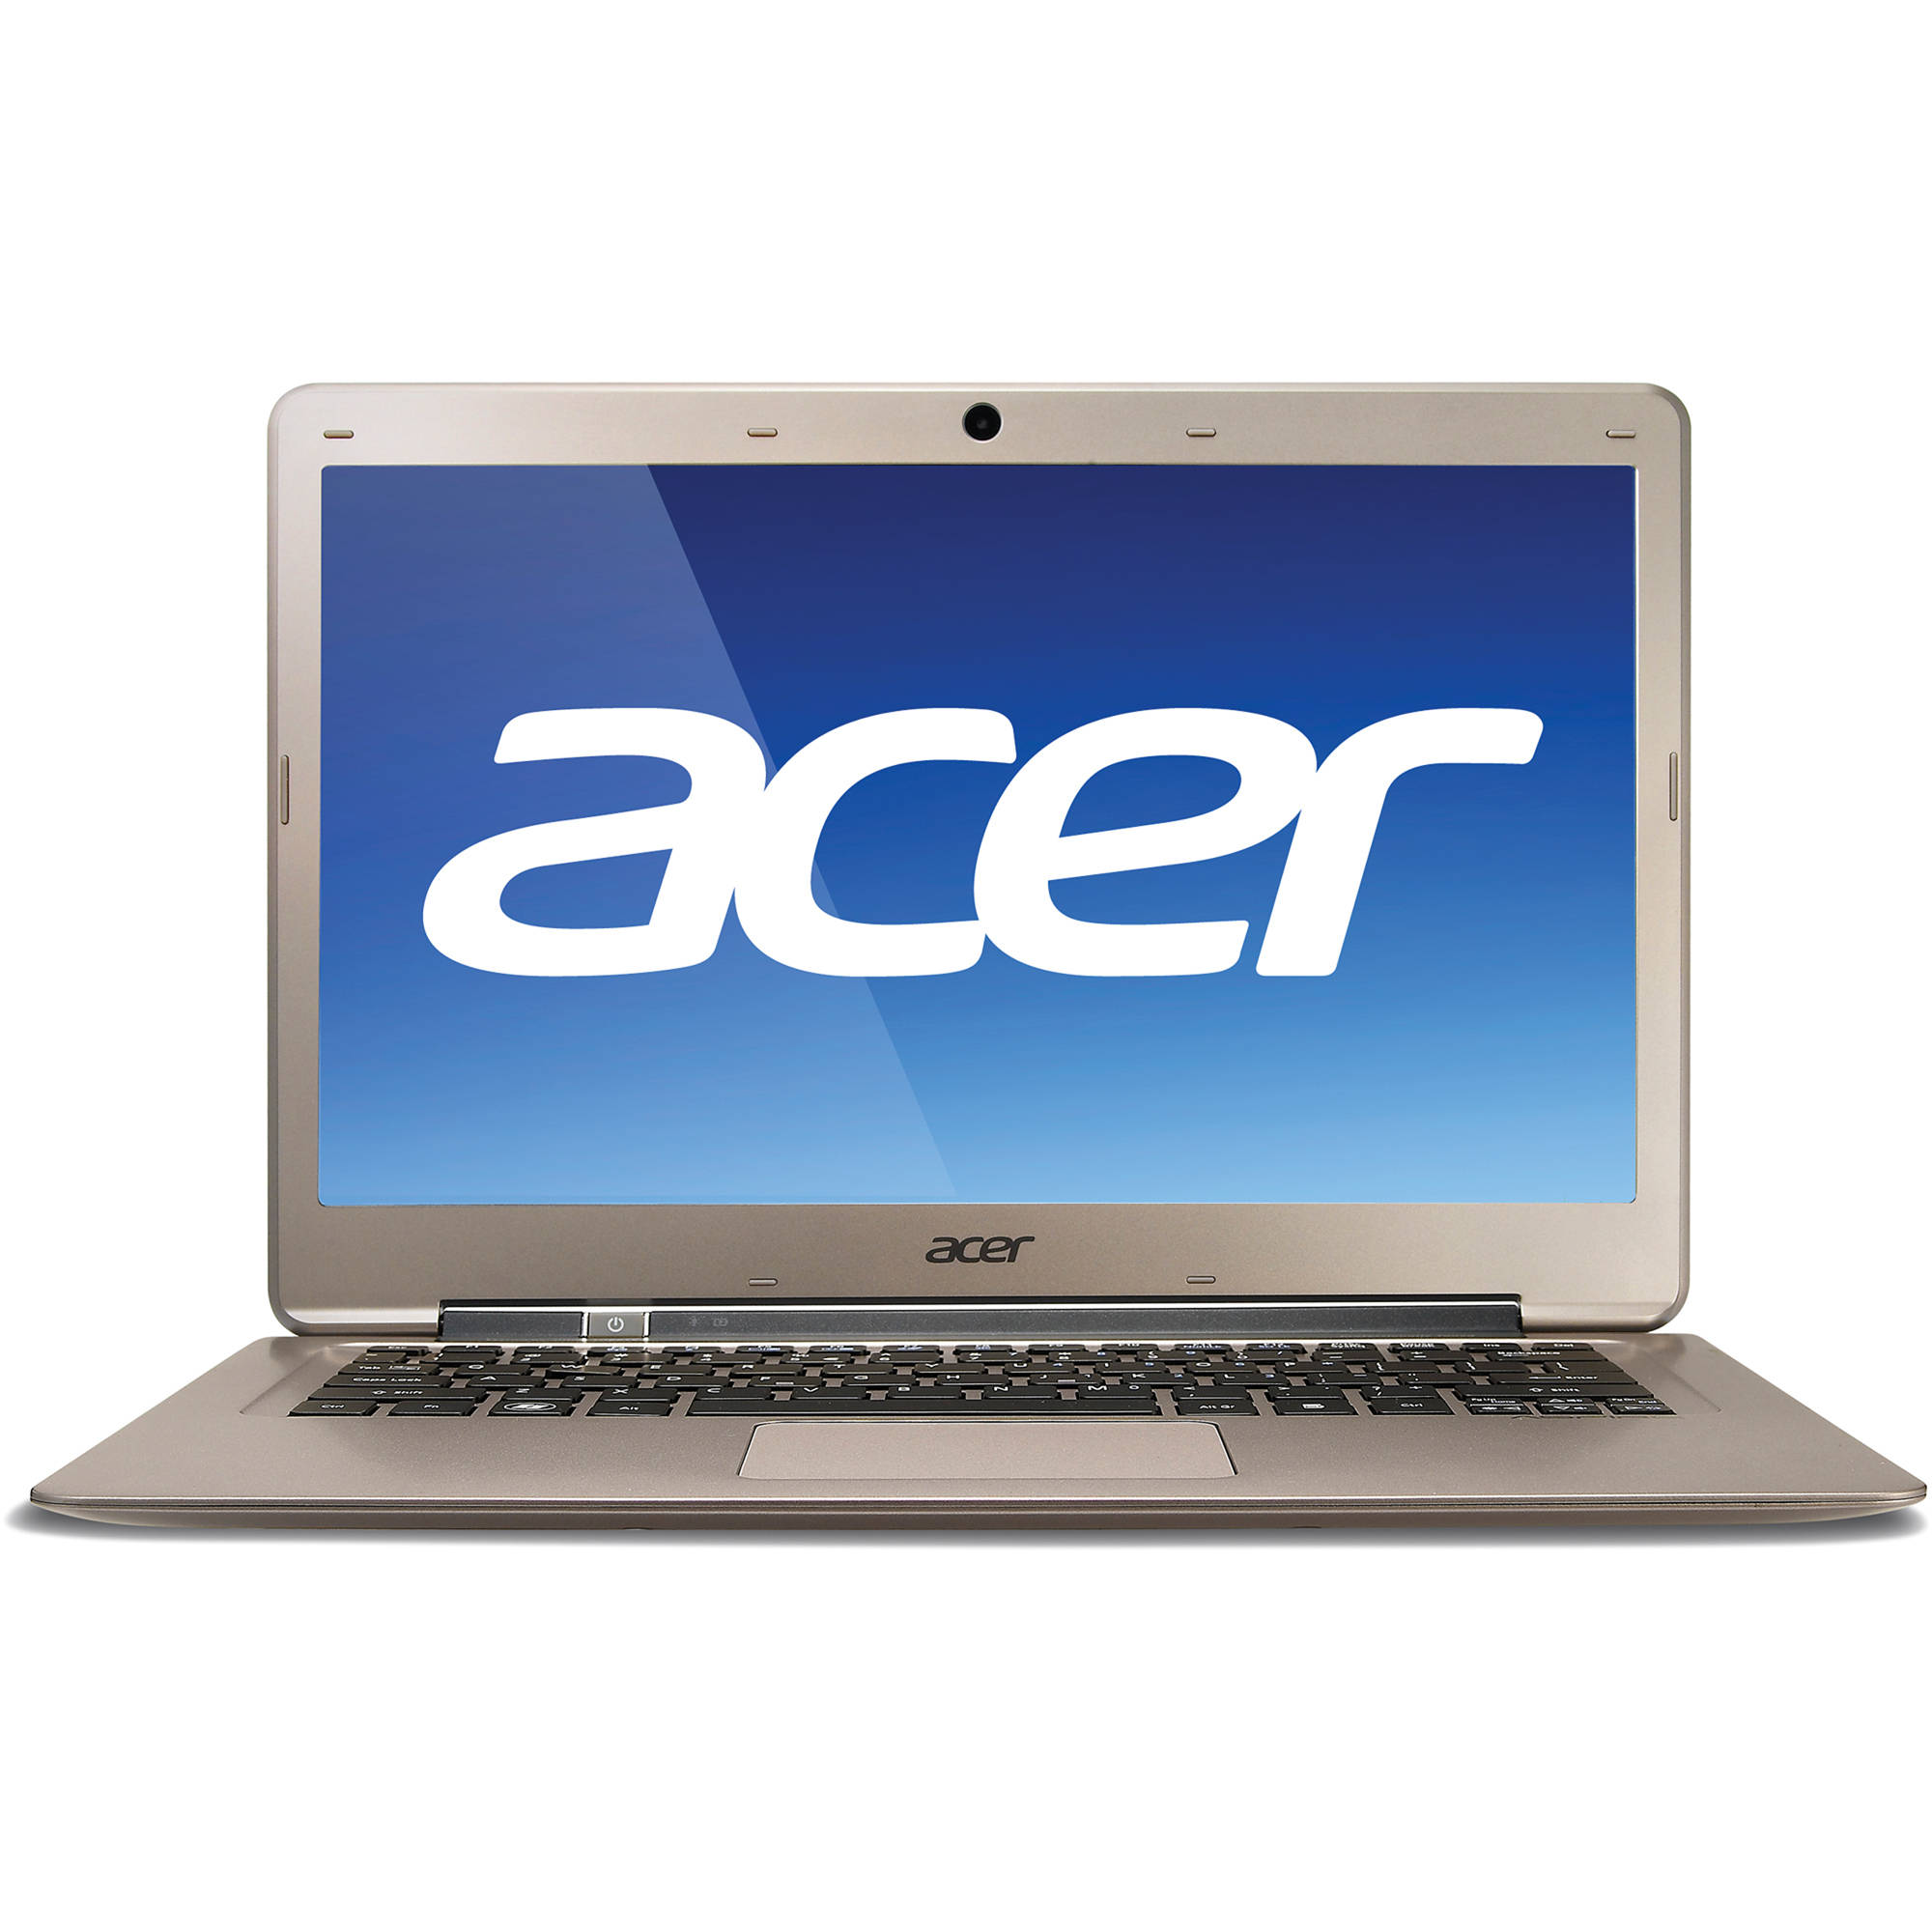 Acer aspire s3 specifications